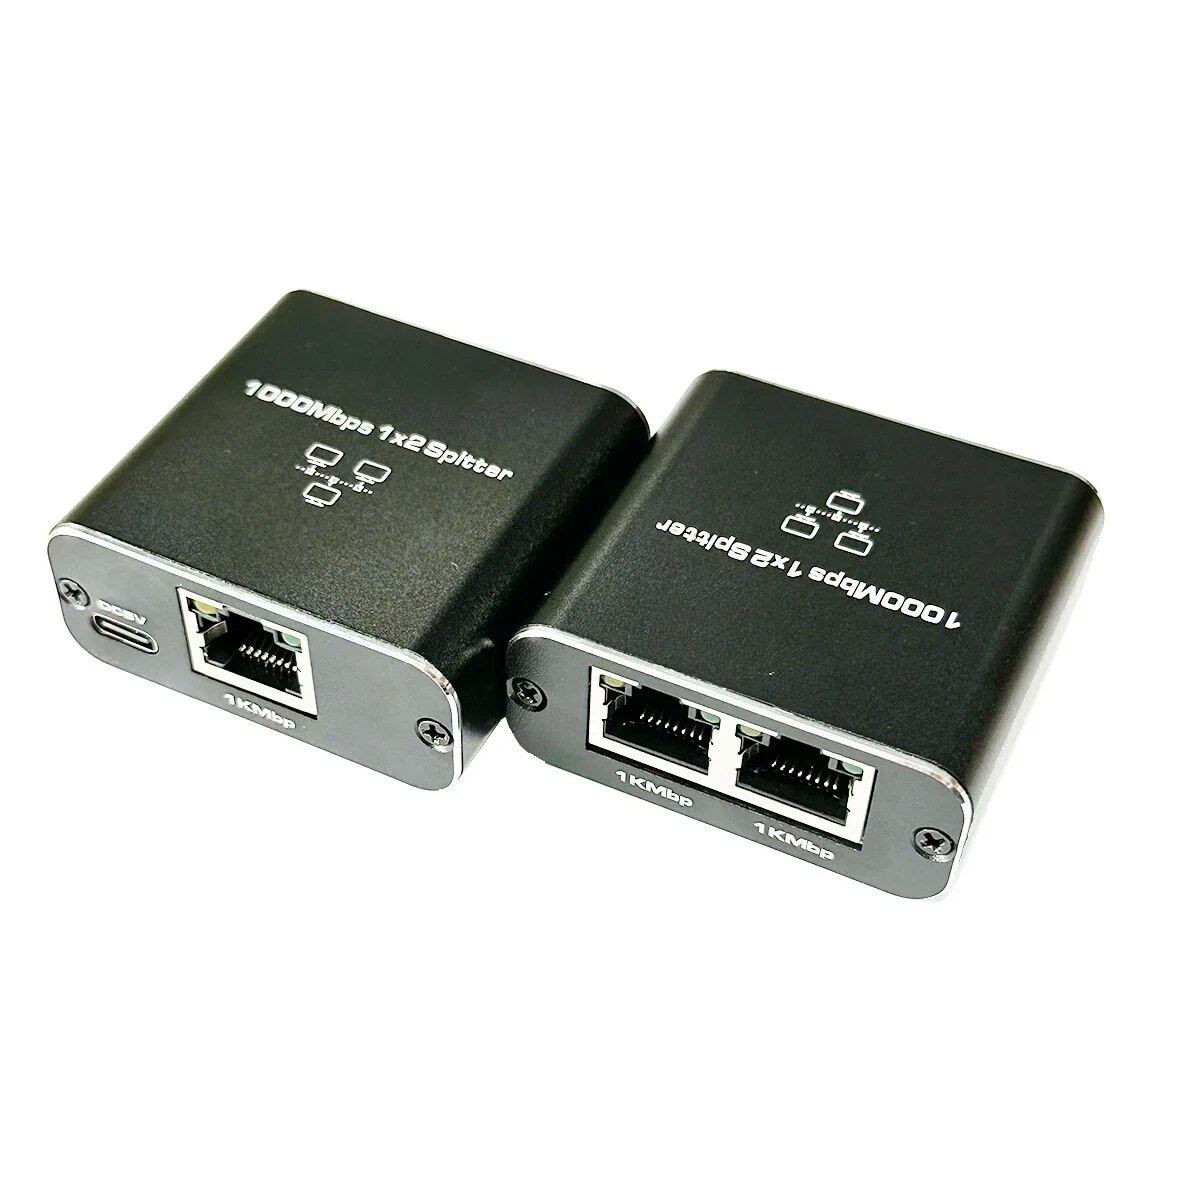 й ̴  ⰡƮ ͳ Ʈũ ̺ Ȯ, PC TV ڽ   Rj45 Ŀ, 1 in 2 Out